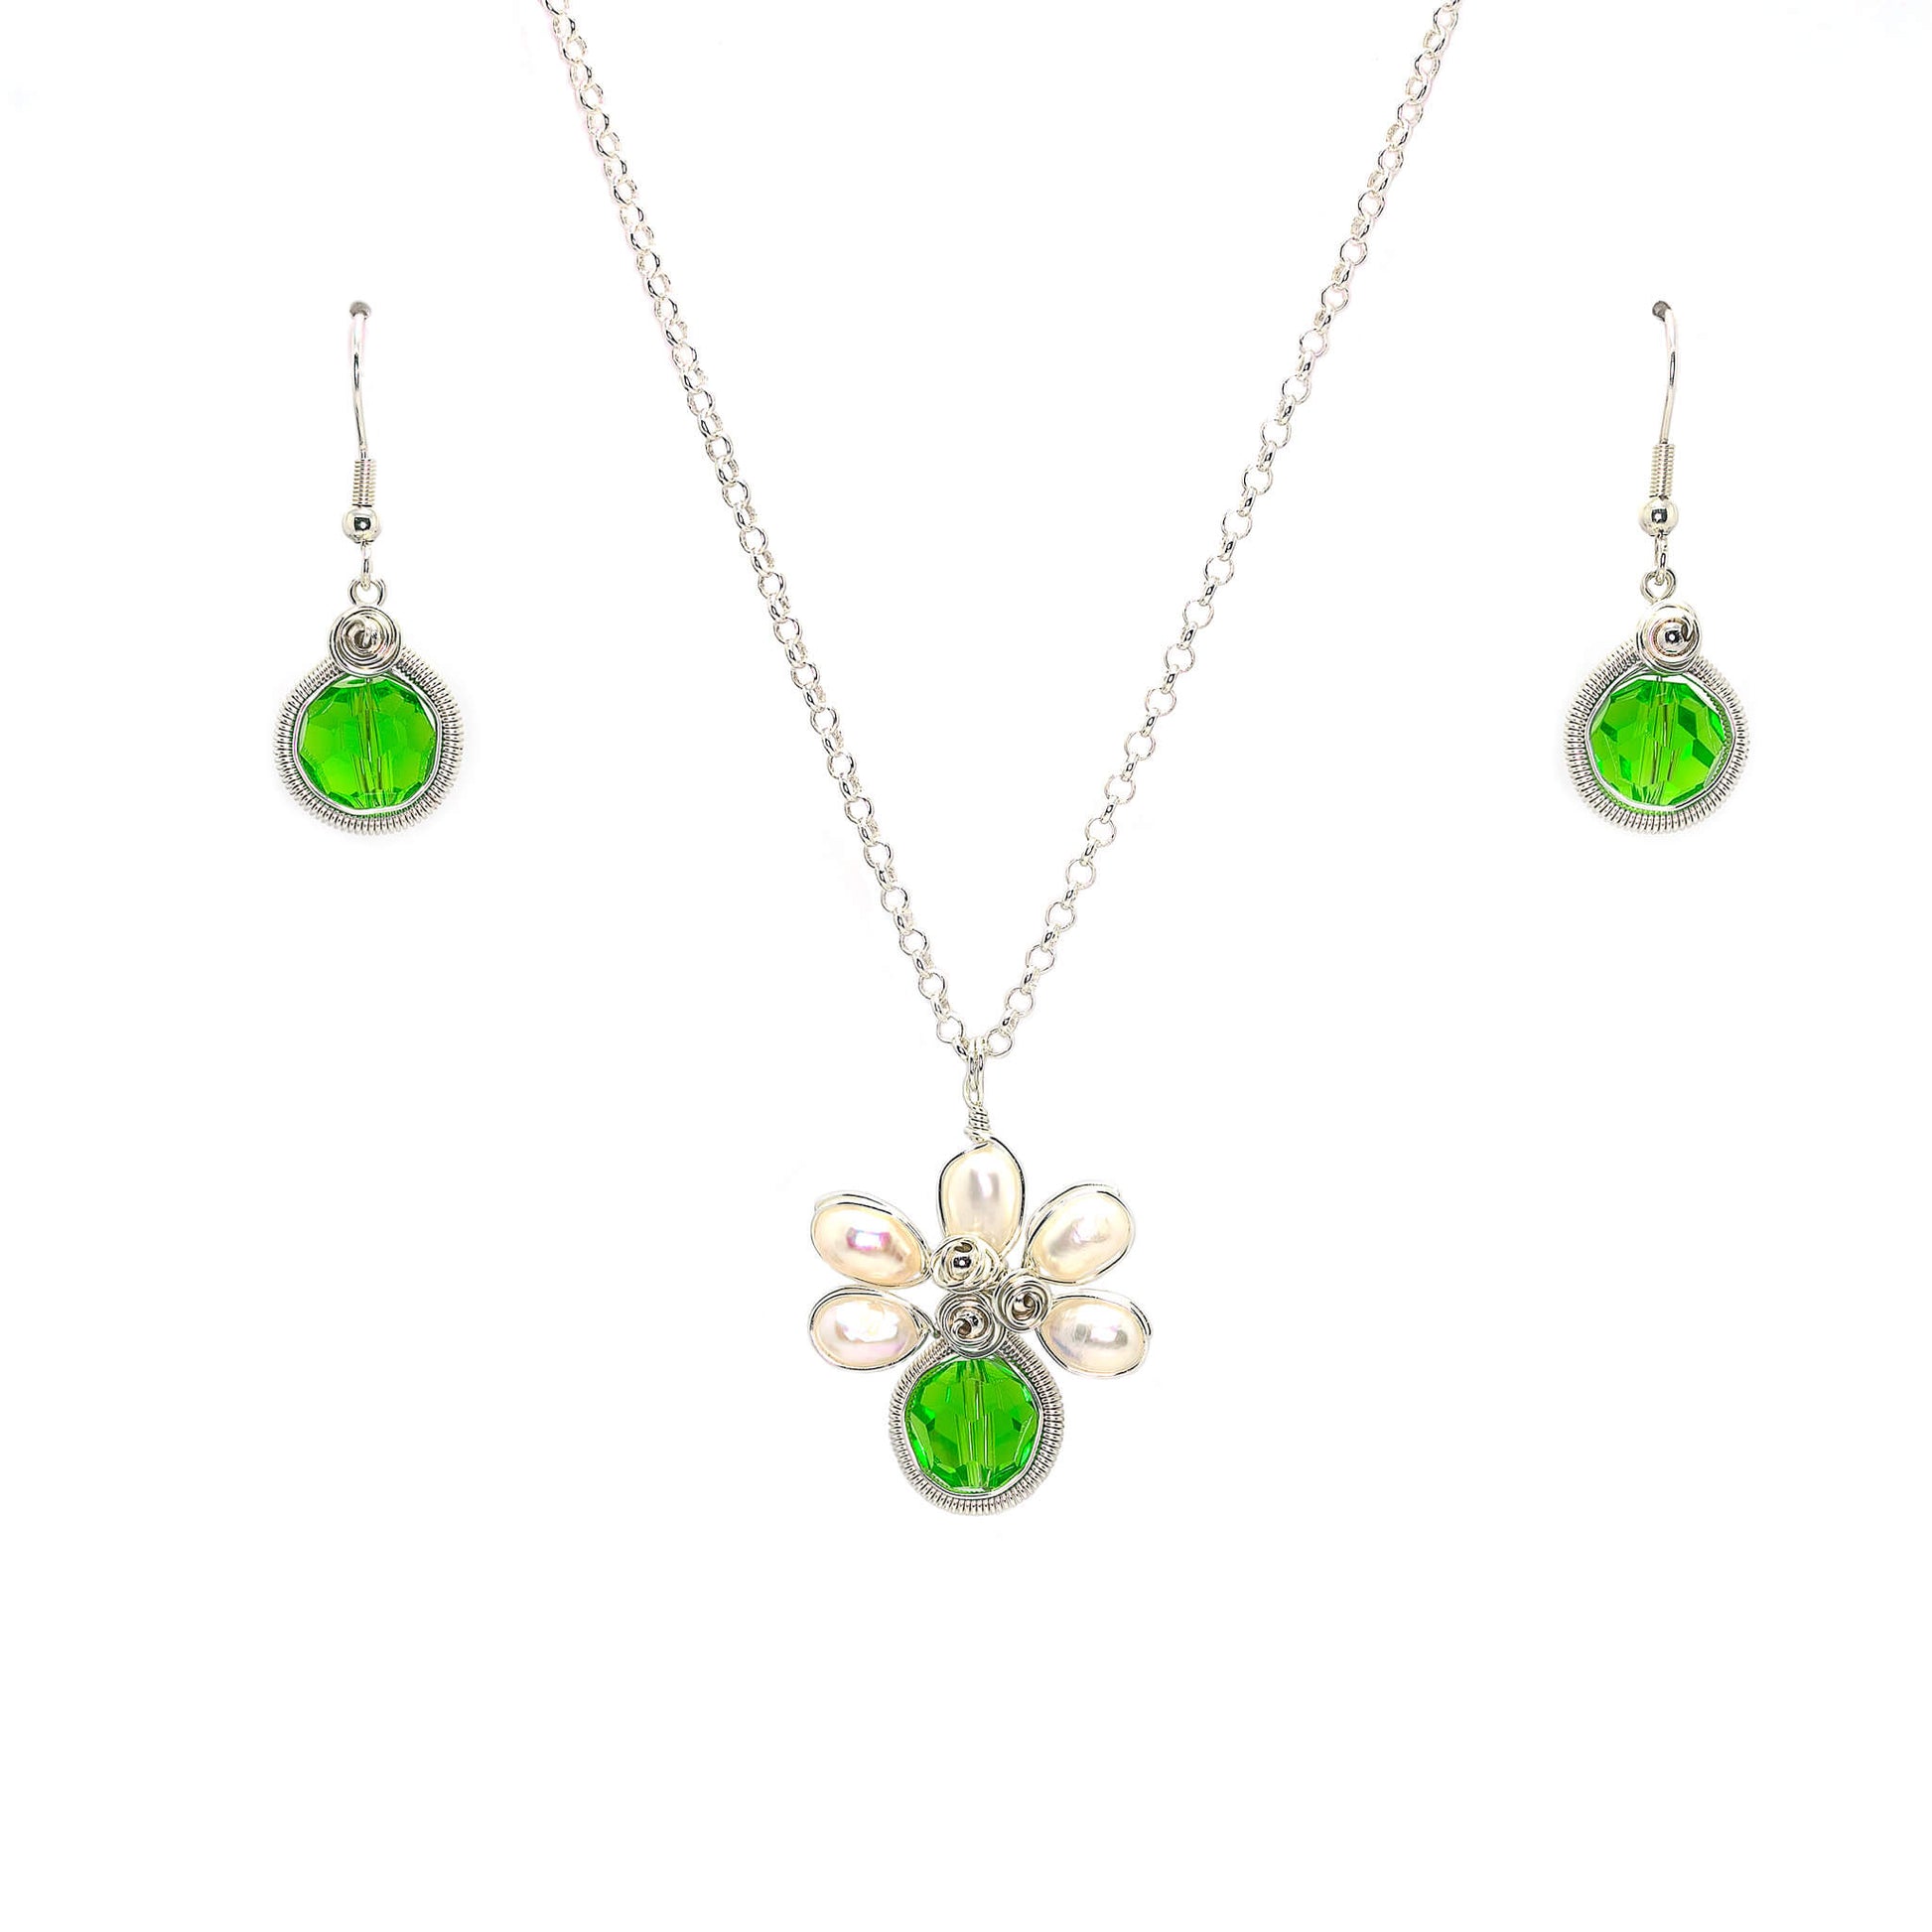 August Birthstone Crystal Necklace.-Earrings Set. Green Crystals, Fresh Water Pearls  and Silver Set. 9.25 Sterling Silver Chain. 